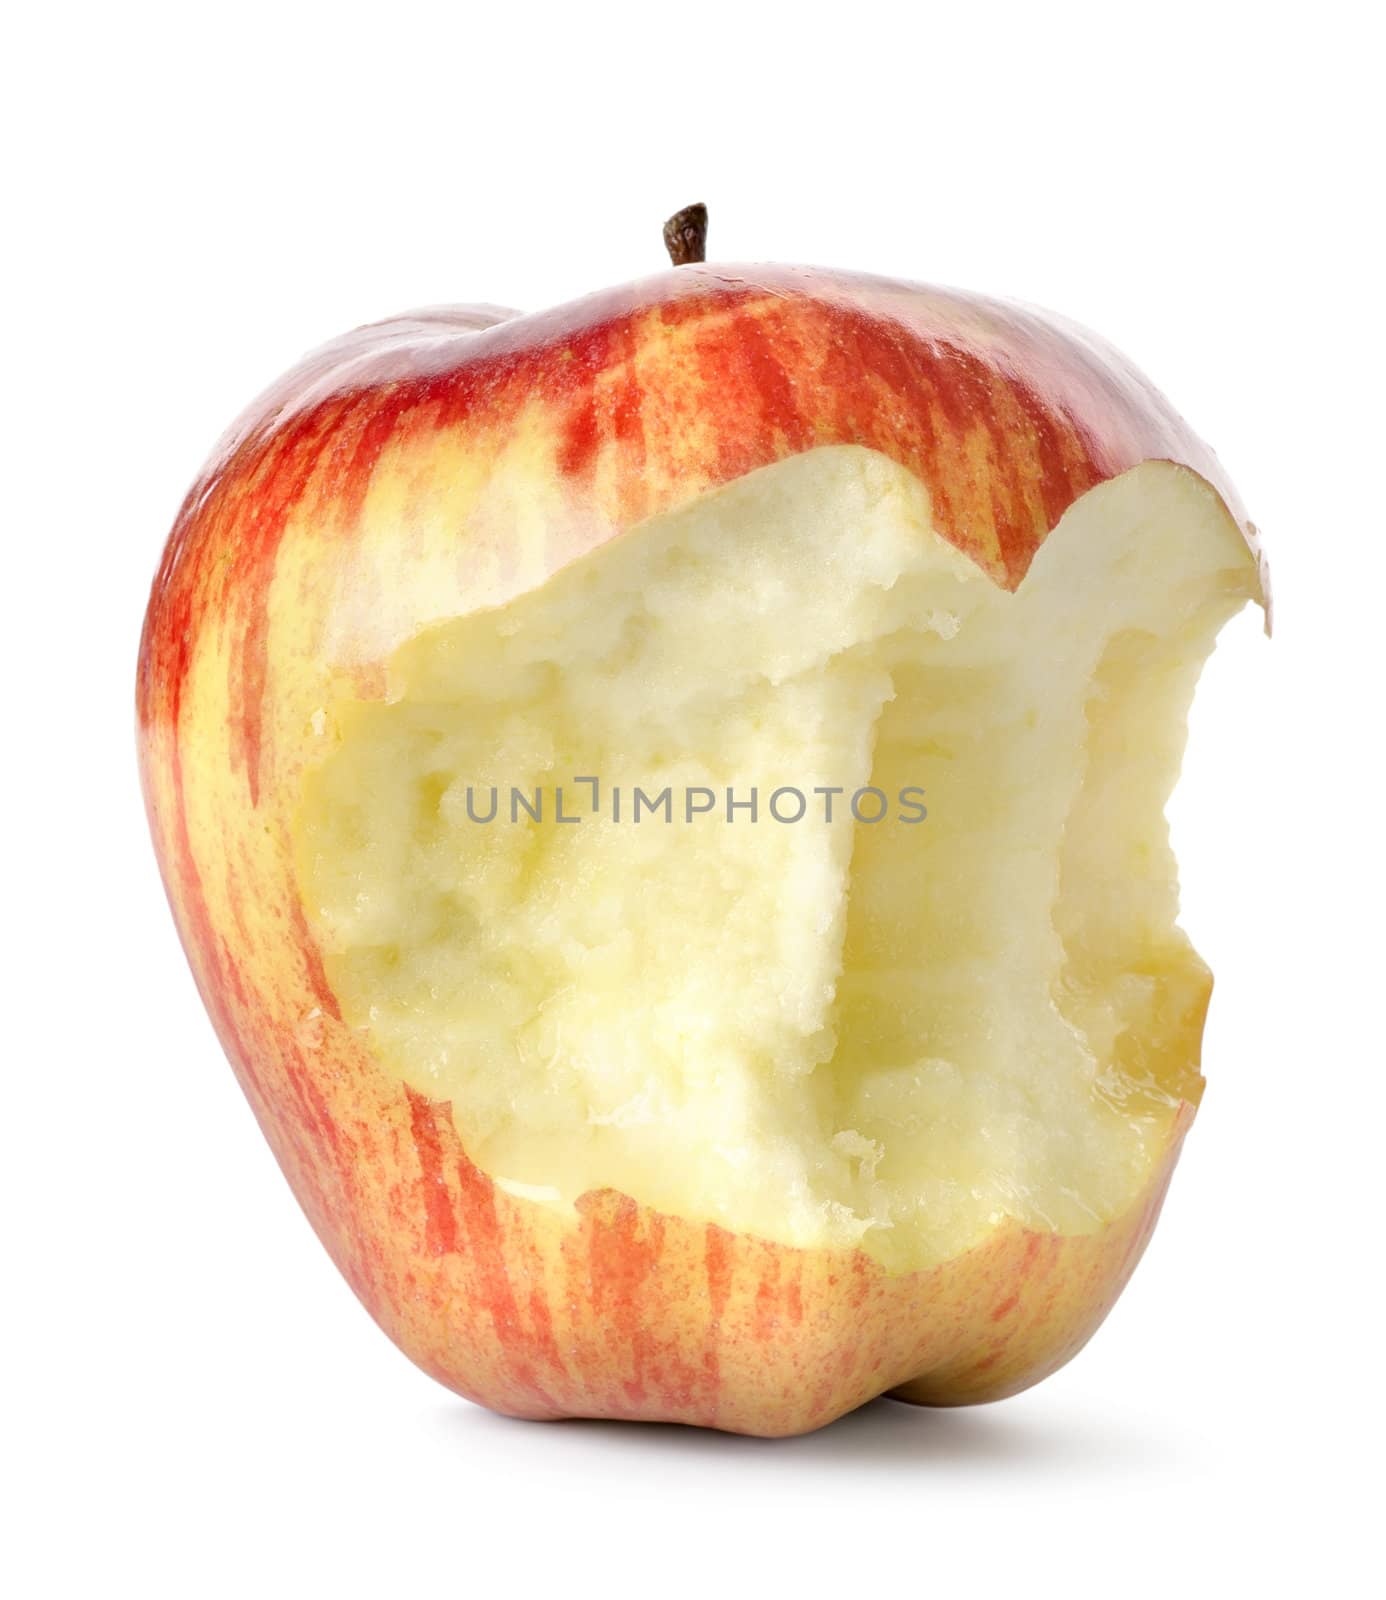 Eaten red apple  isolated on a white background